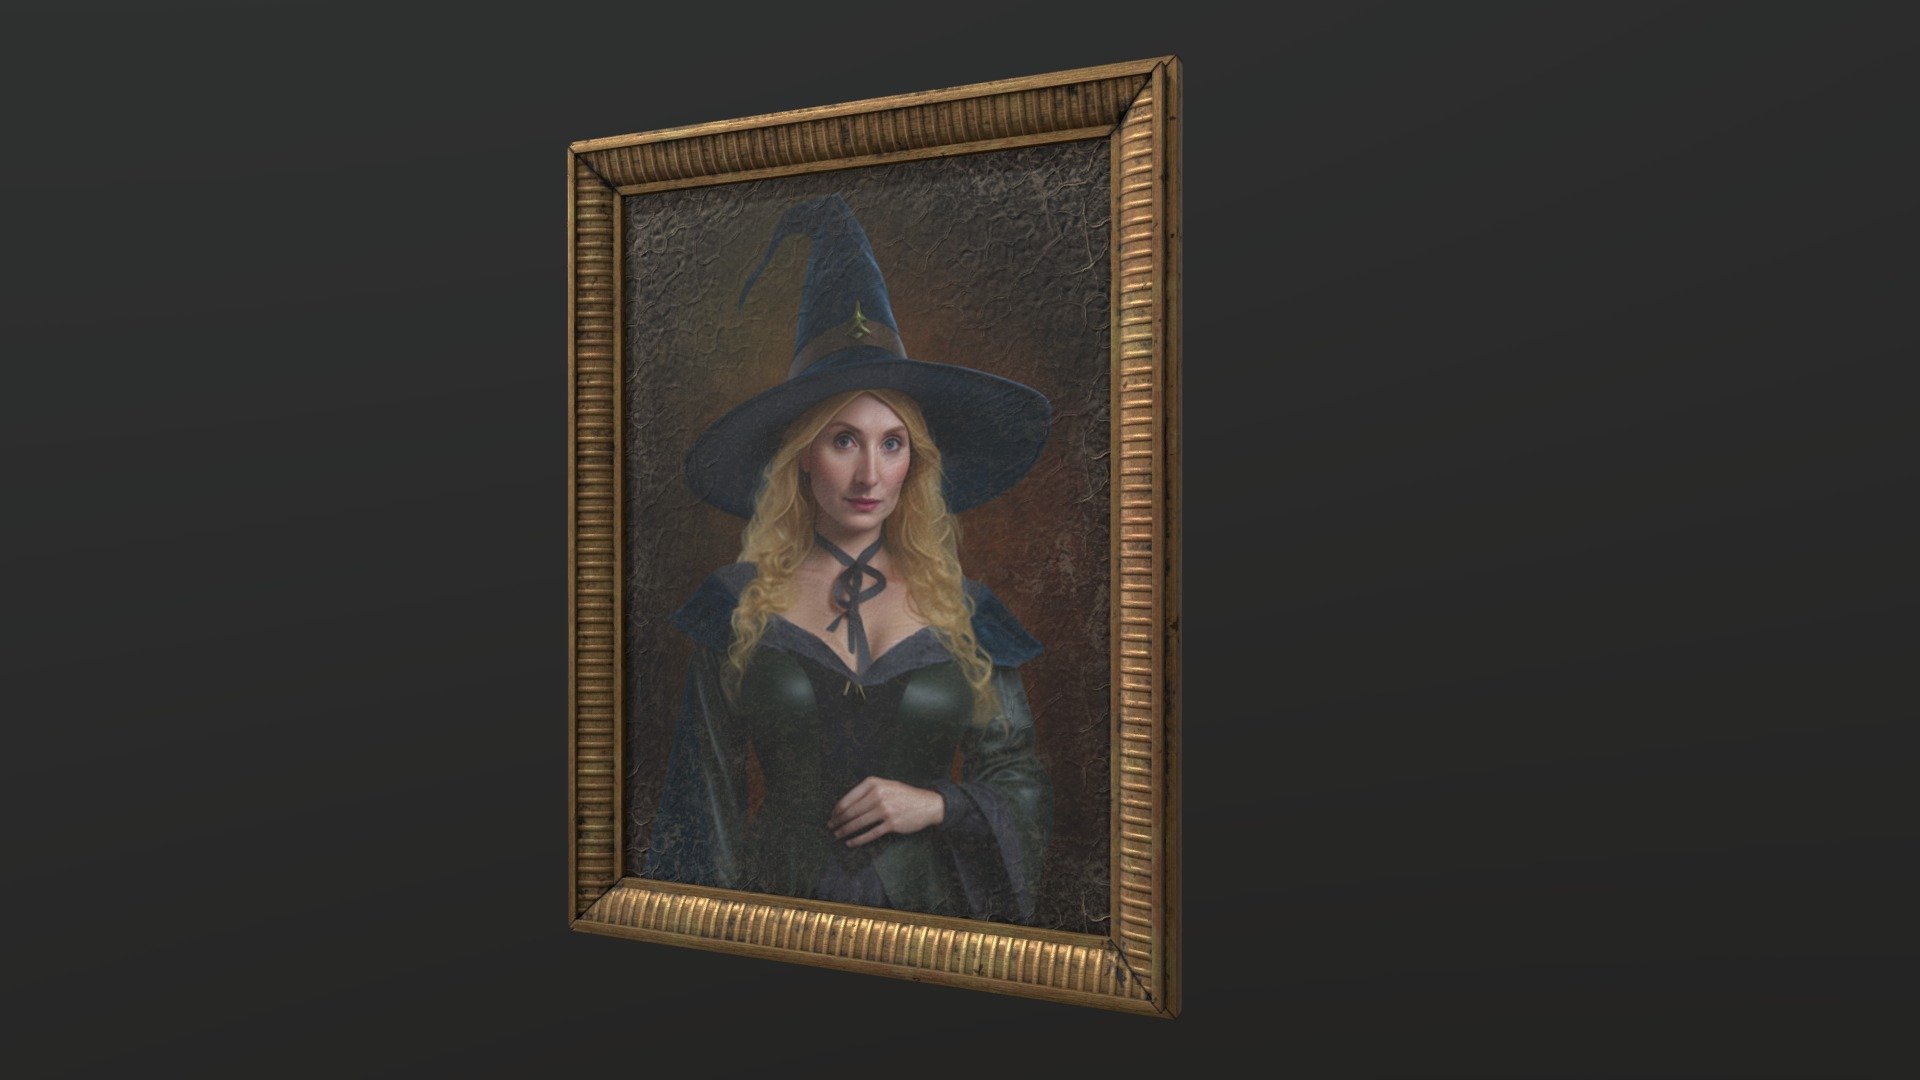 An old oil painting portrait of a witch

4K maps: Base Color, Normal (DirectX and OpenGL), Roughness, Metallic and Ambient Occlusion.

Formats: .fbx and .obj

The original illustration also included (without any of the weathering effects I applied in the texturing process) 3d model